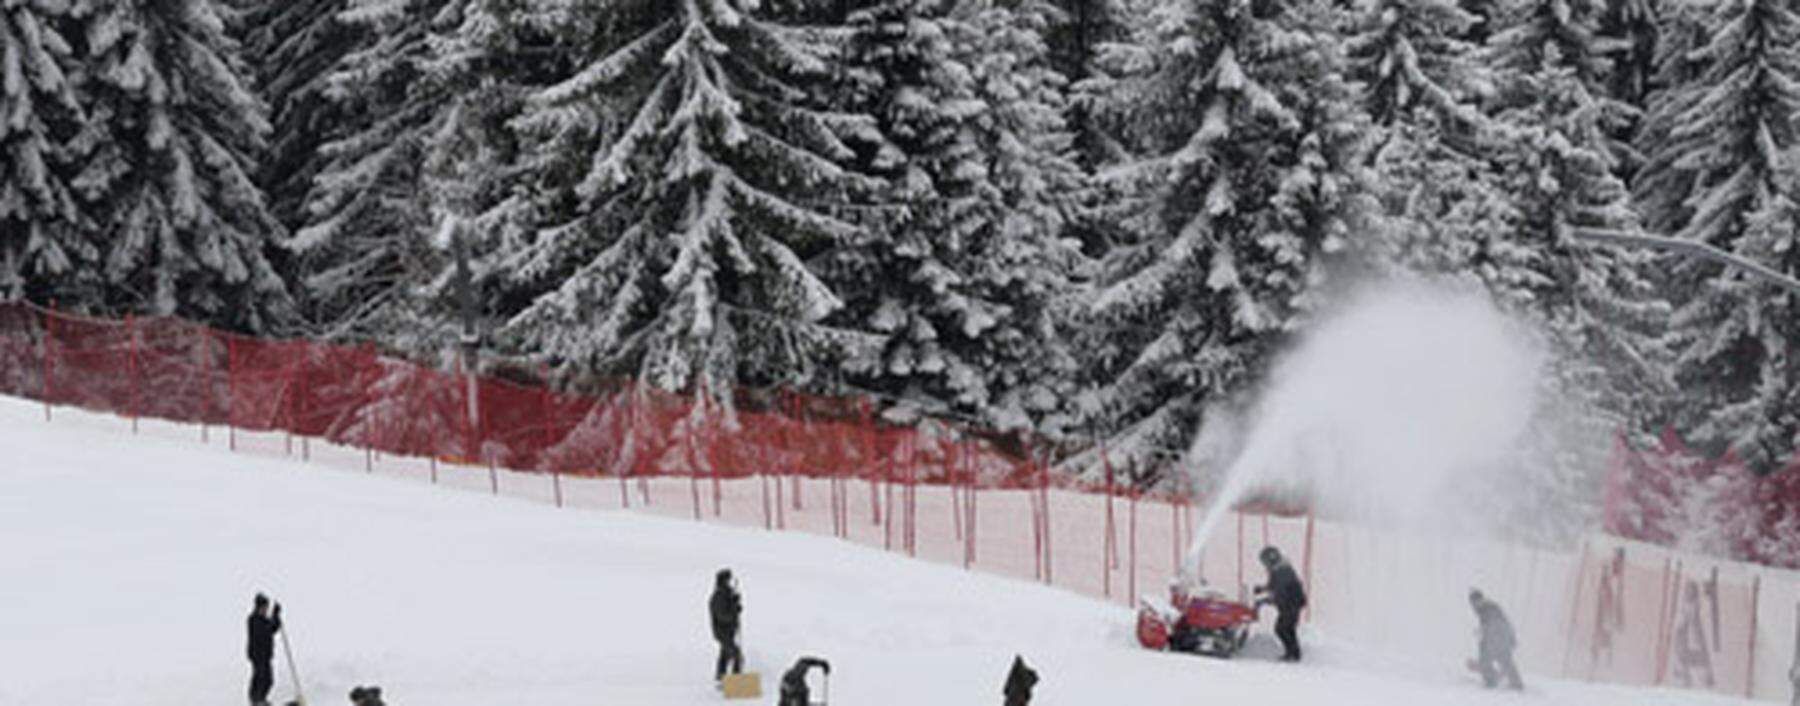 General view of the men´s Alpine skiing downhill course covered with a thin layer of snow in Kitzbuehel